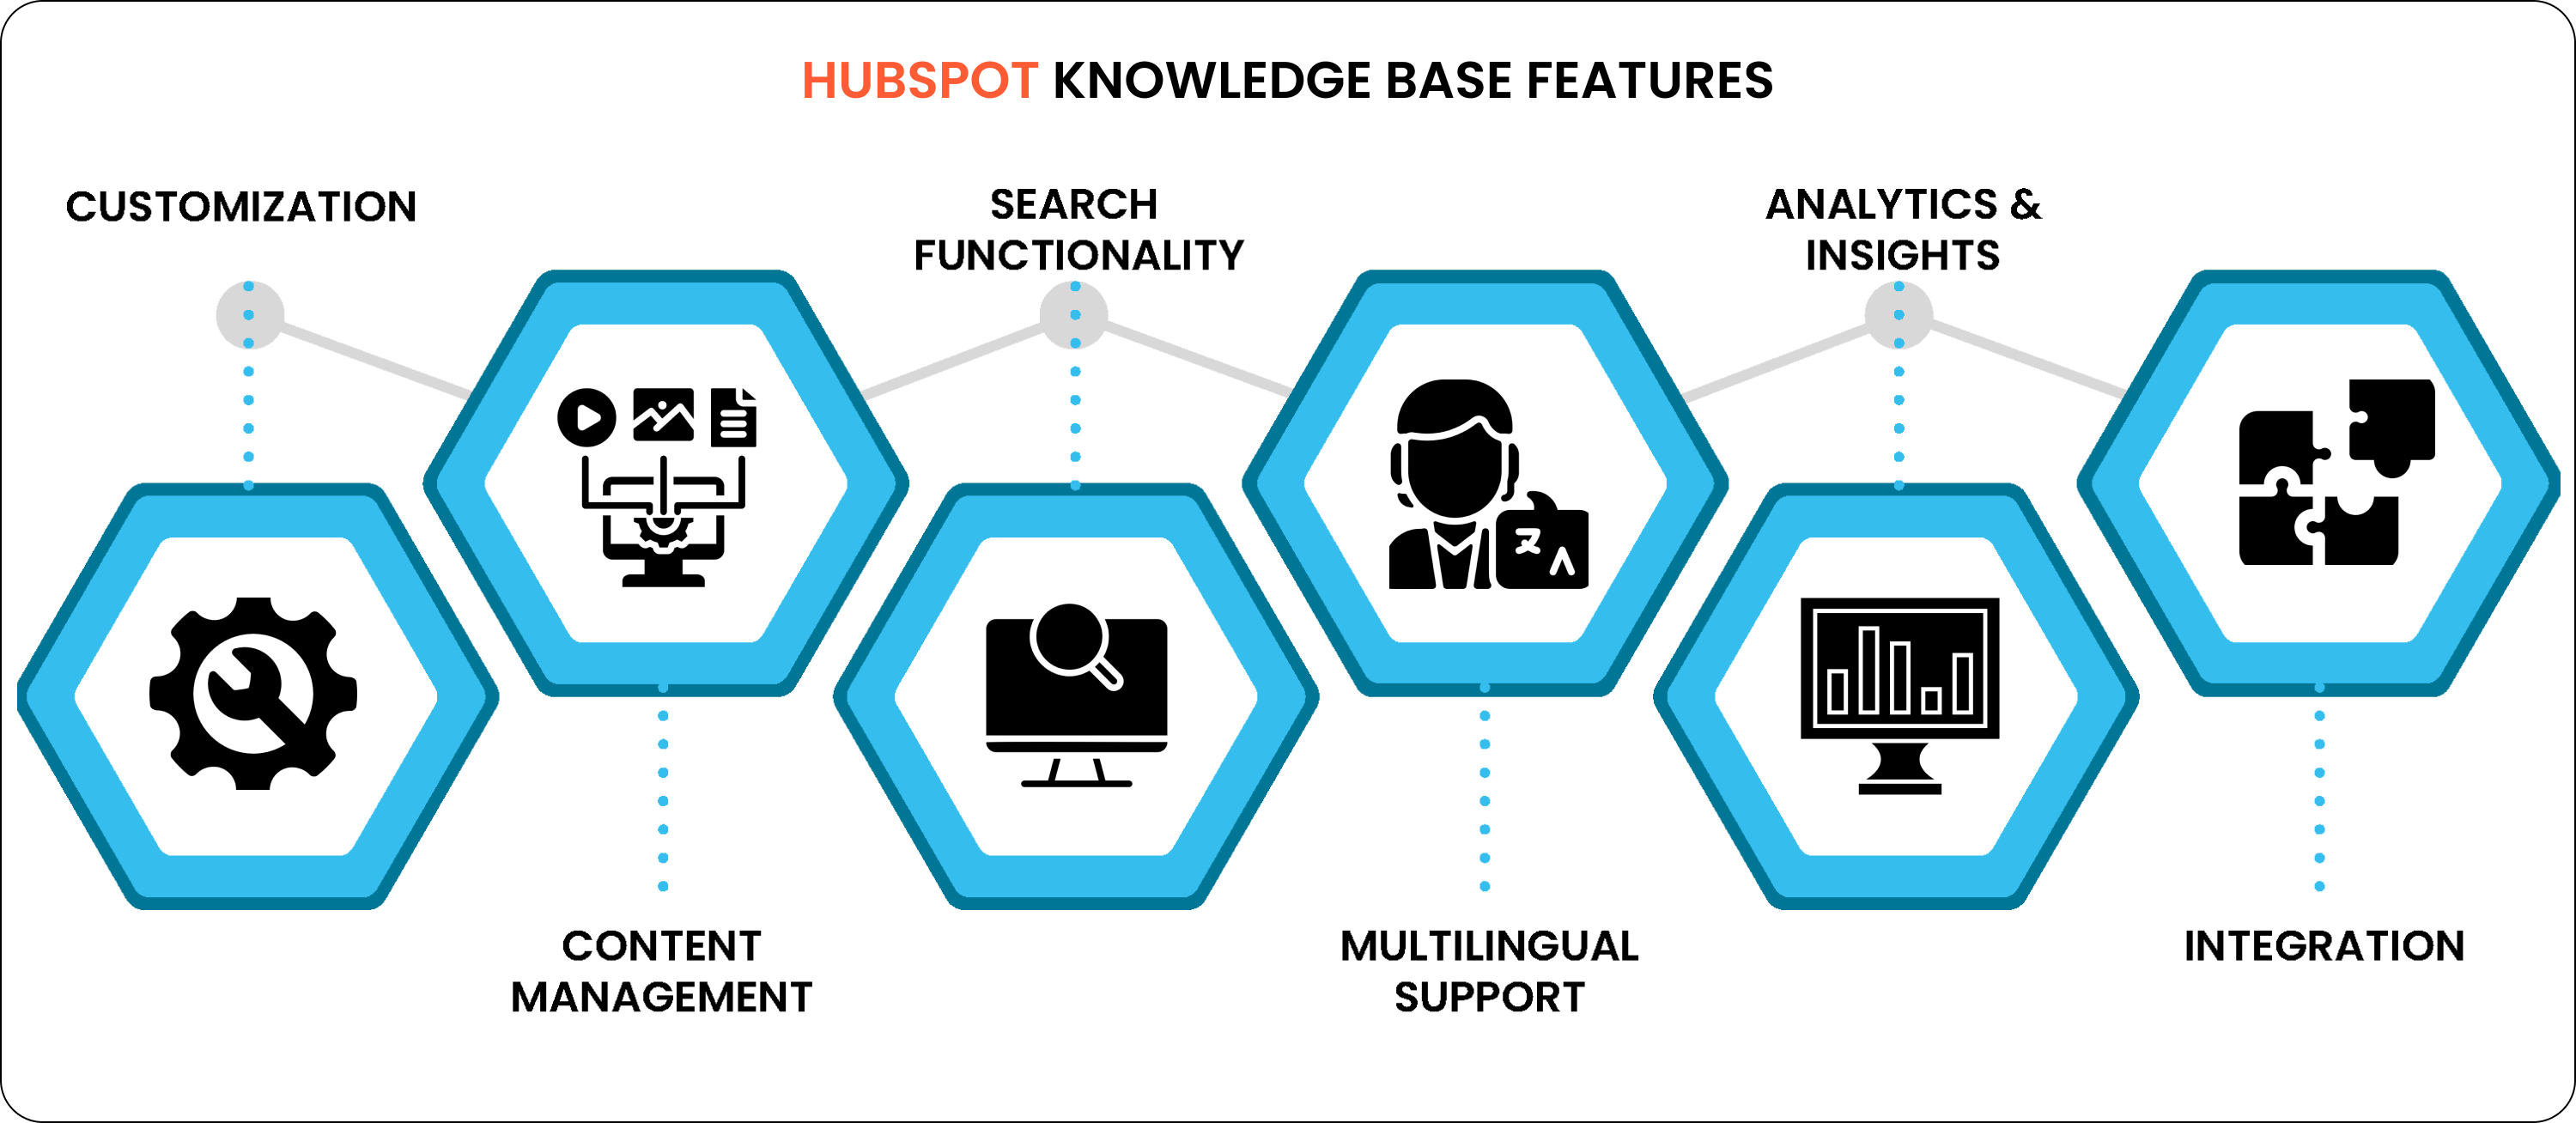 HubSpot Knowledge Base features